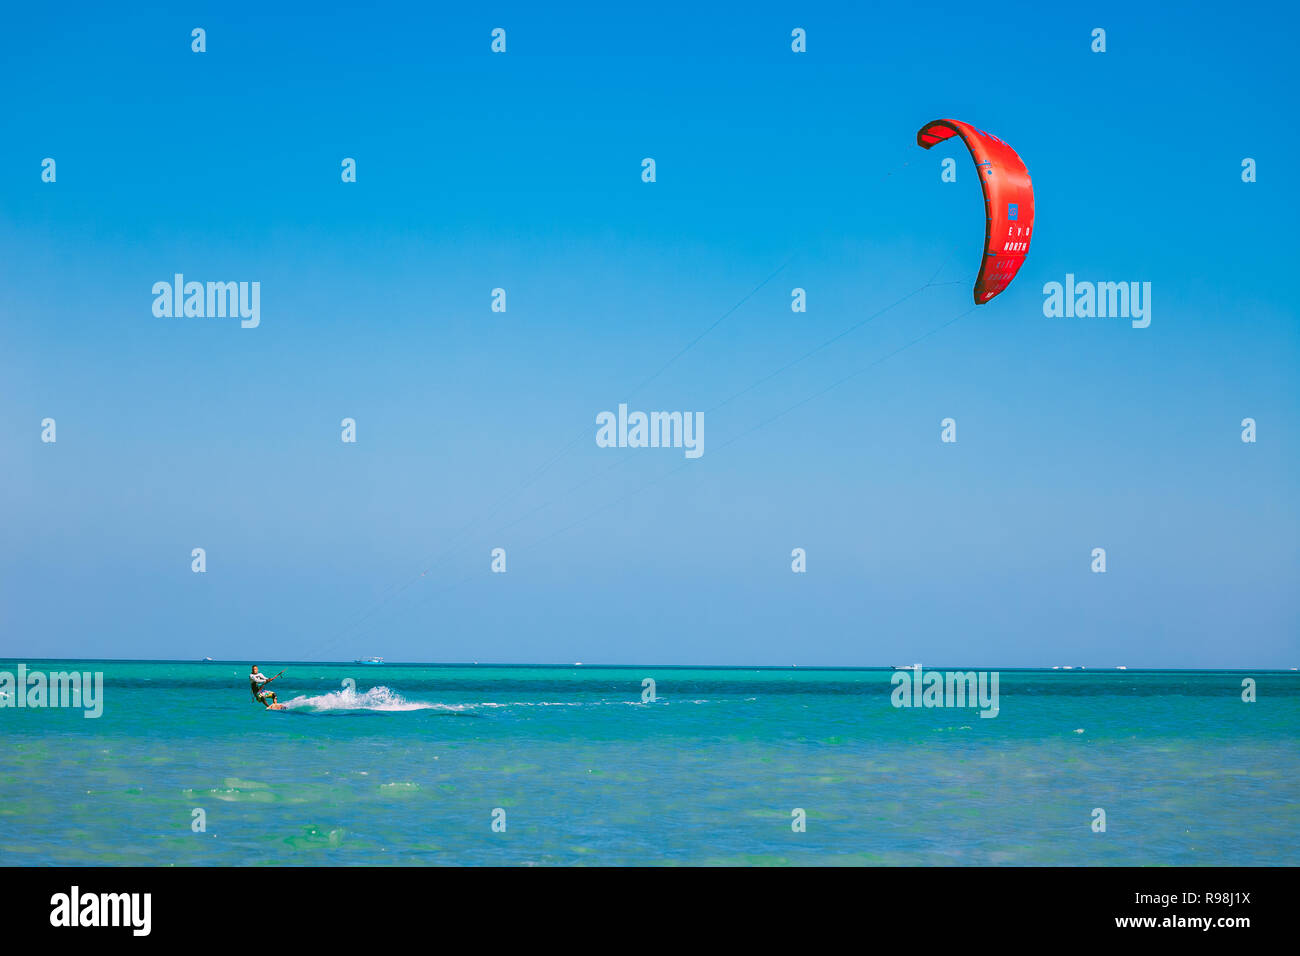 Egypt, Hurghada - 30 November, 2017: The kitesurfer with red kite gliding over the Red sea surface. Overwhelming marine scenery. The lone kiteboarder  Stock Photo